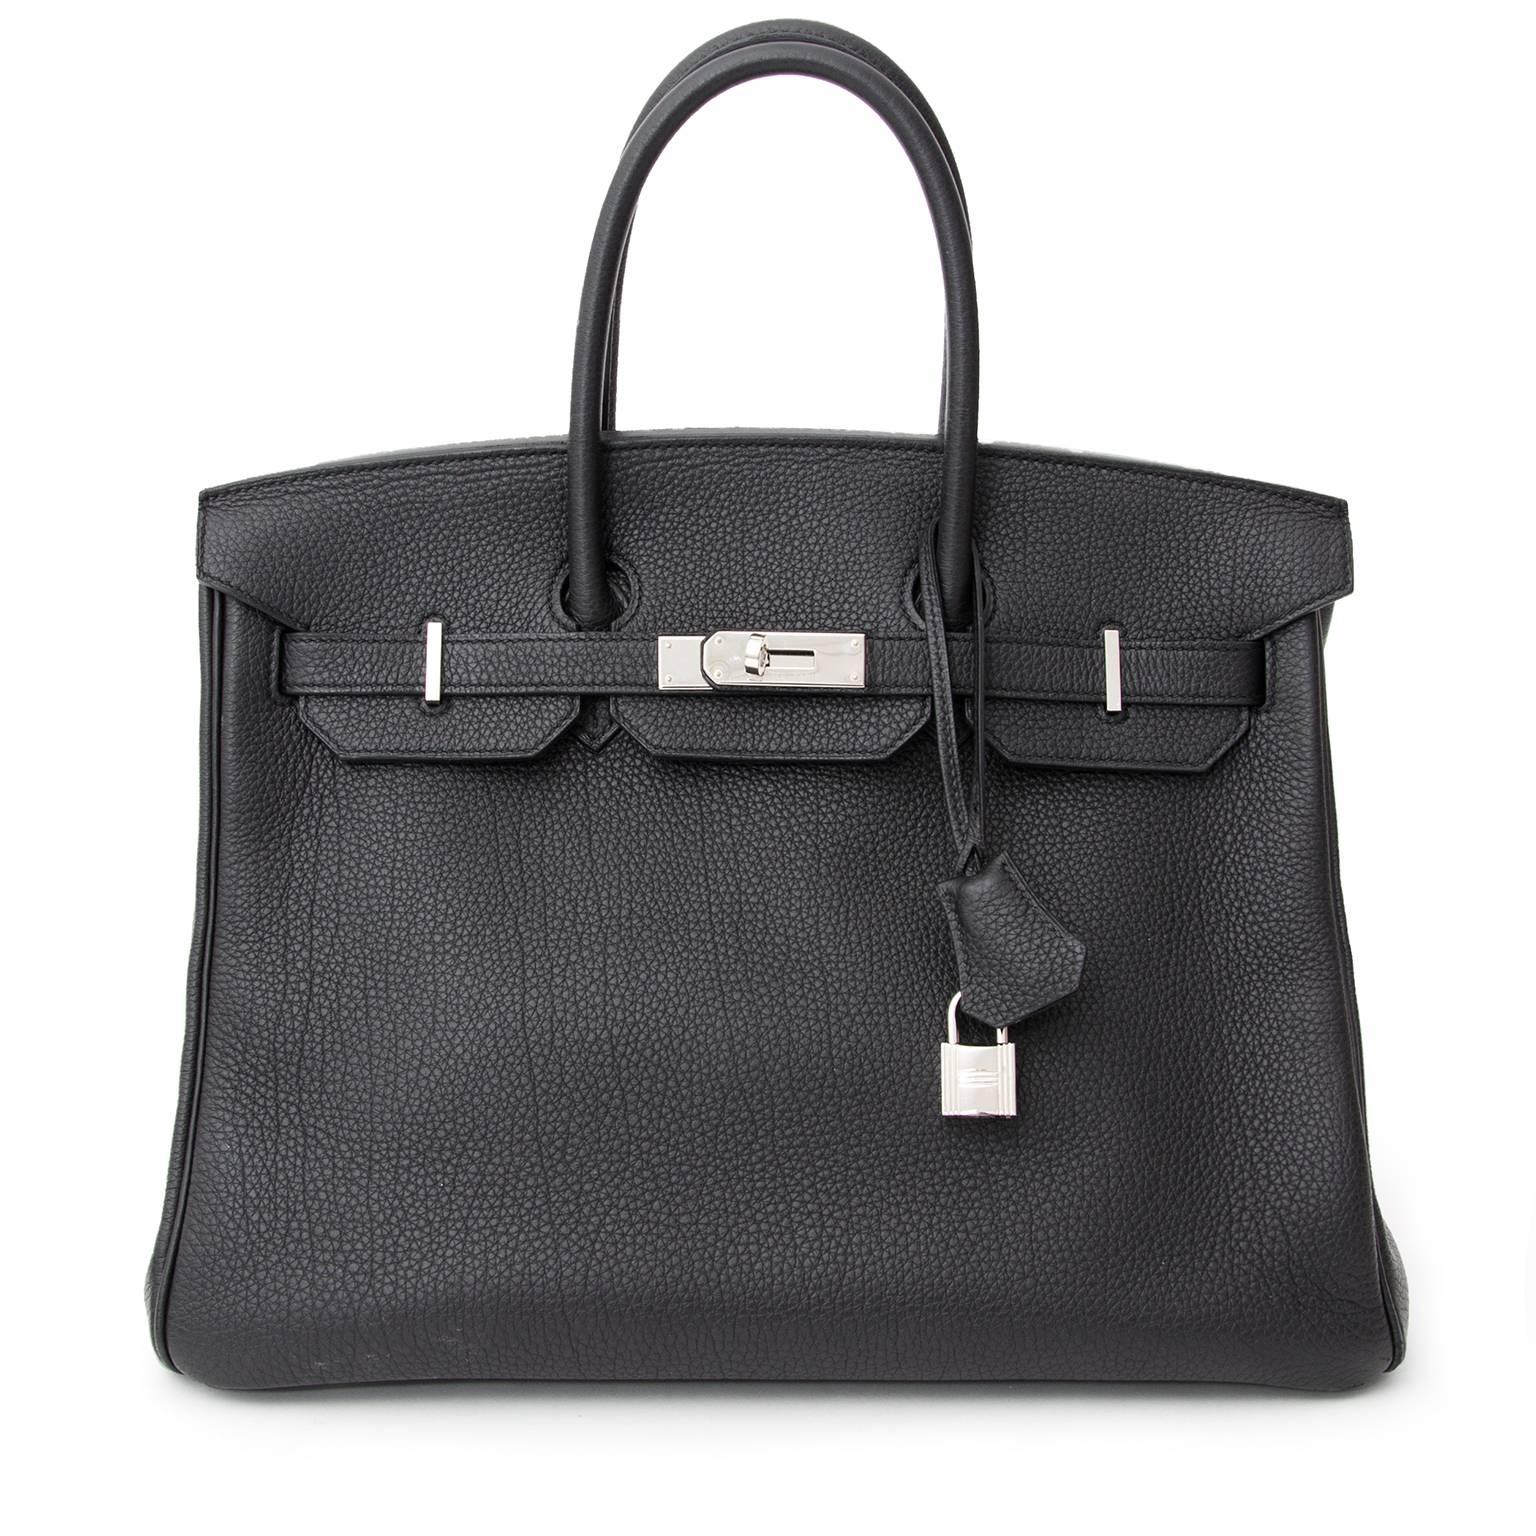 Superbe Hermès Black Birkin size 35 cm in Togo leather.
The Hermès Birkin bag has become a real statement piece in the fashion world with its recognizable design.

The neutral black color works for every season and every color palette. The